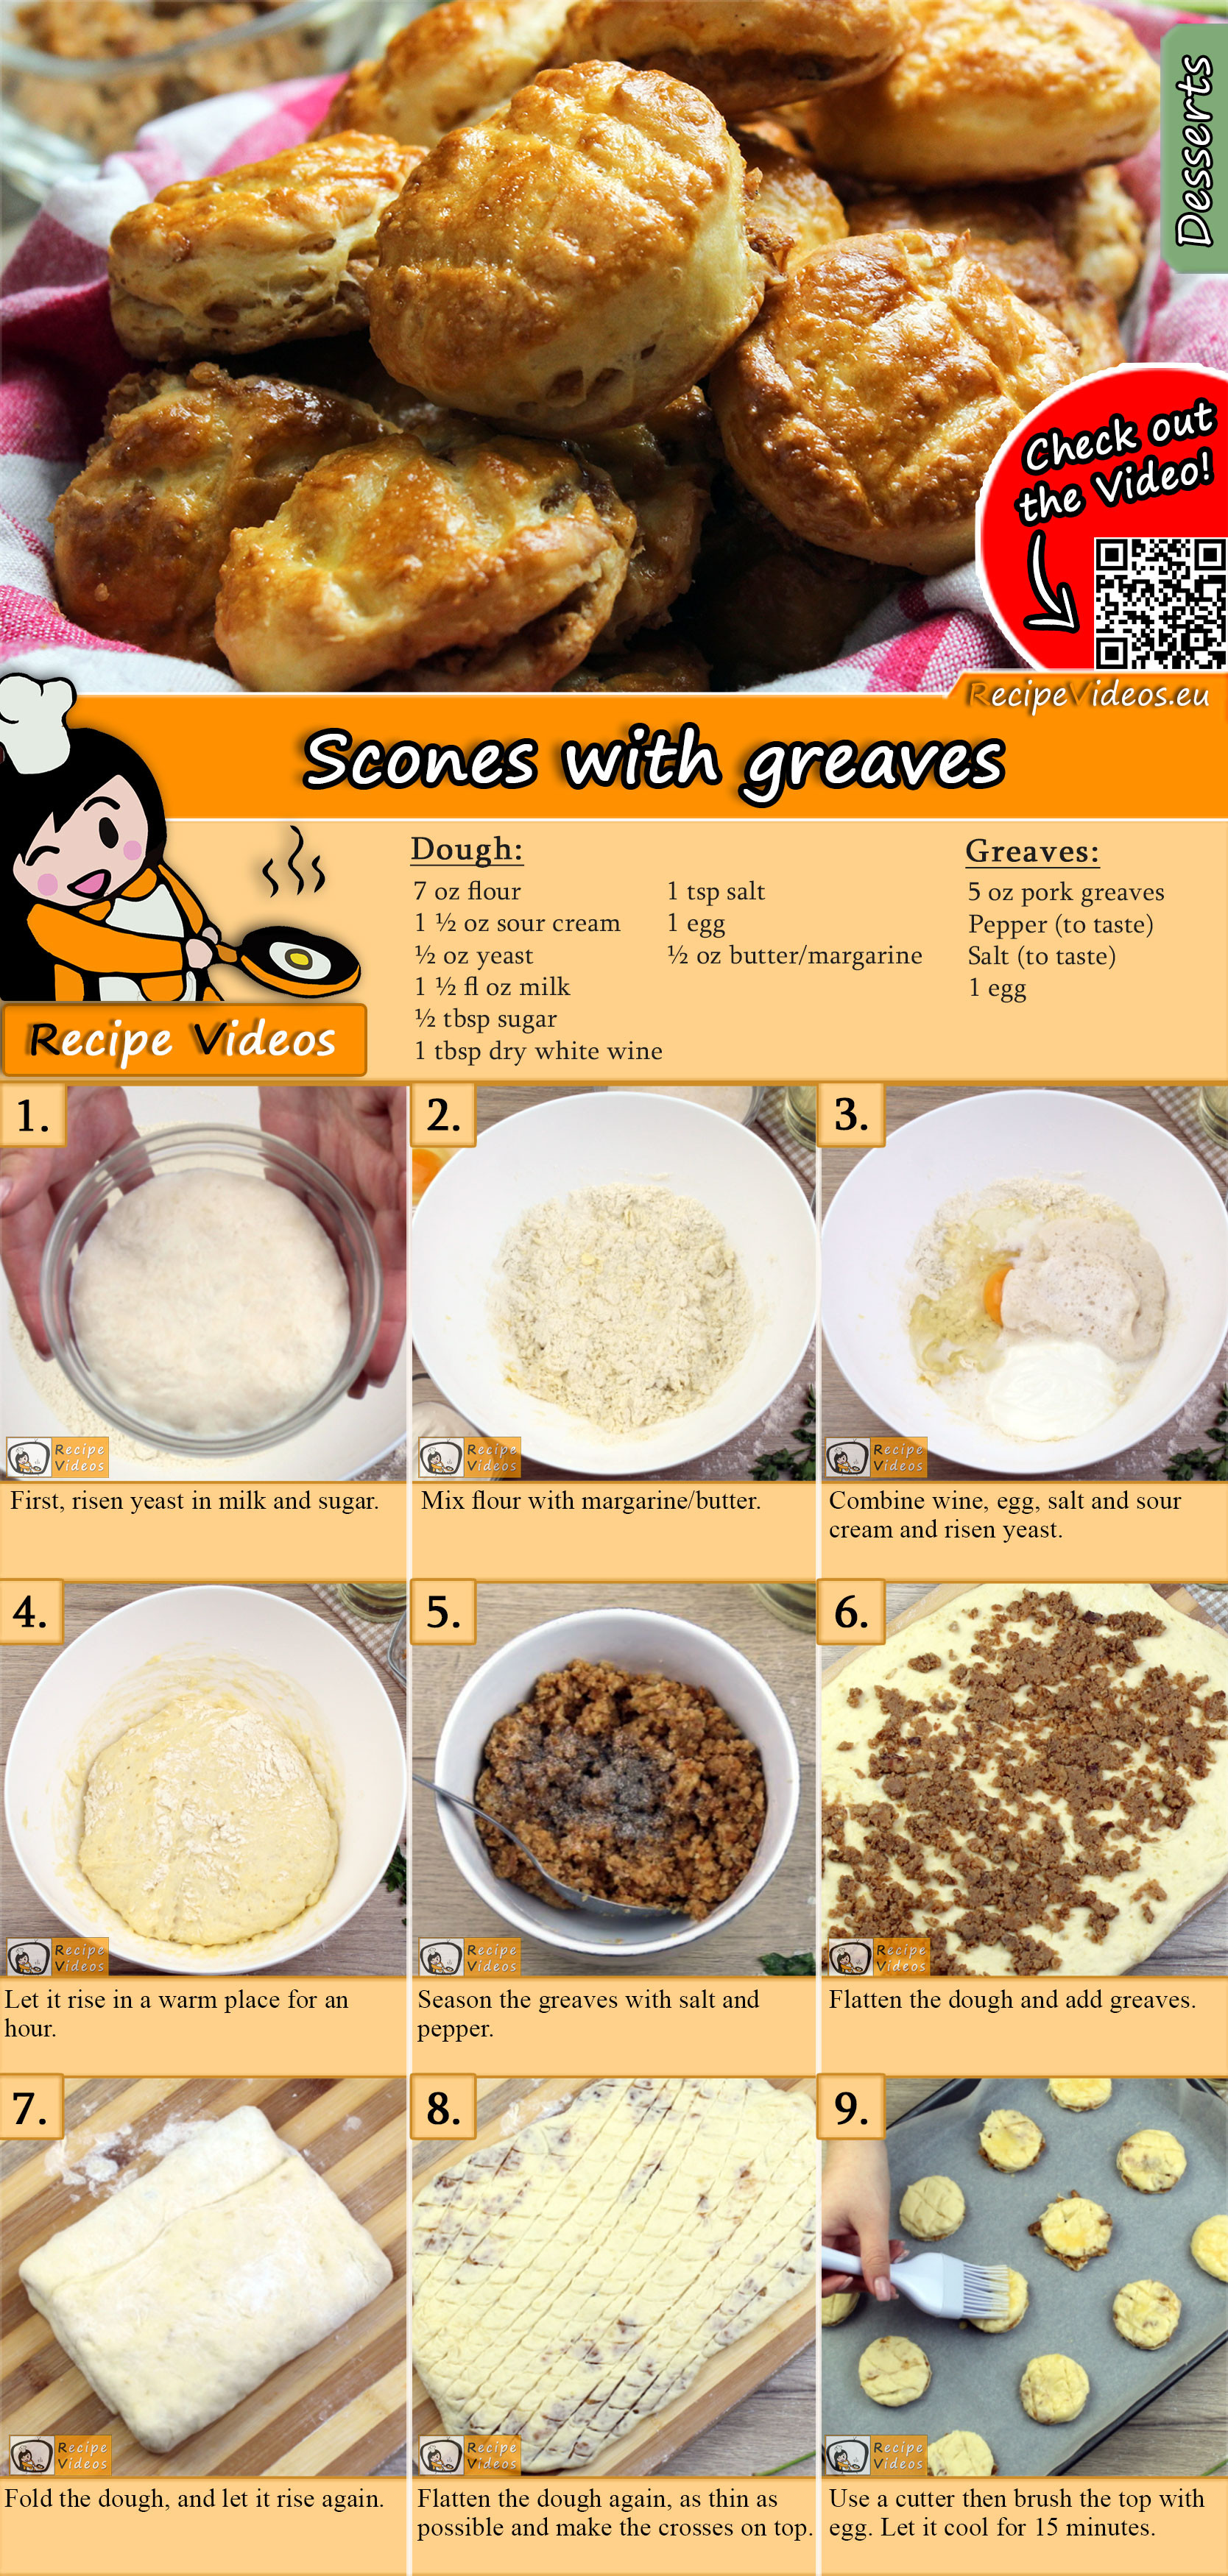 Scones with greaves recipe with video